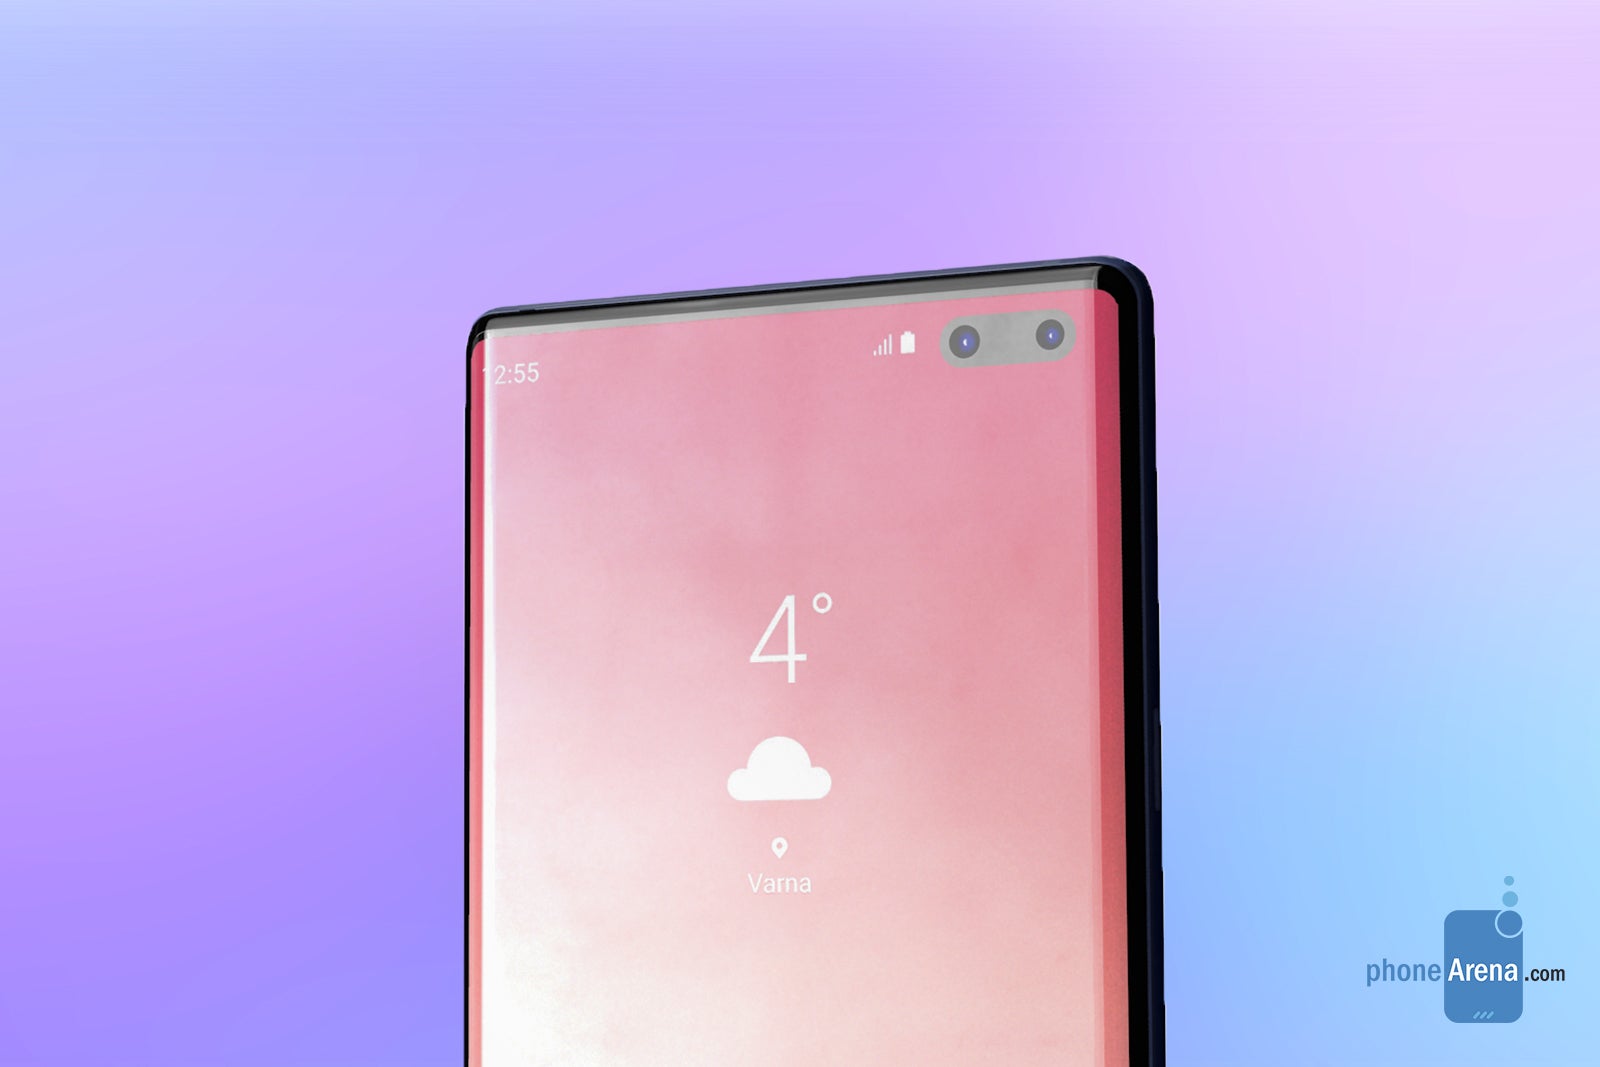 Samsung Galaxy Note 10 concept render based on leaked information - The Samsung Galaxy Note 10 could arrive this August with one huge change